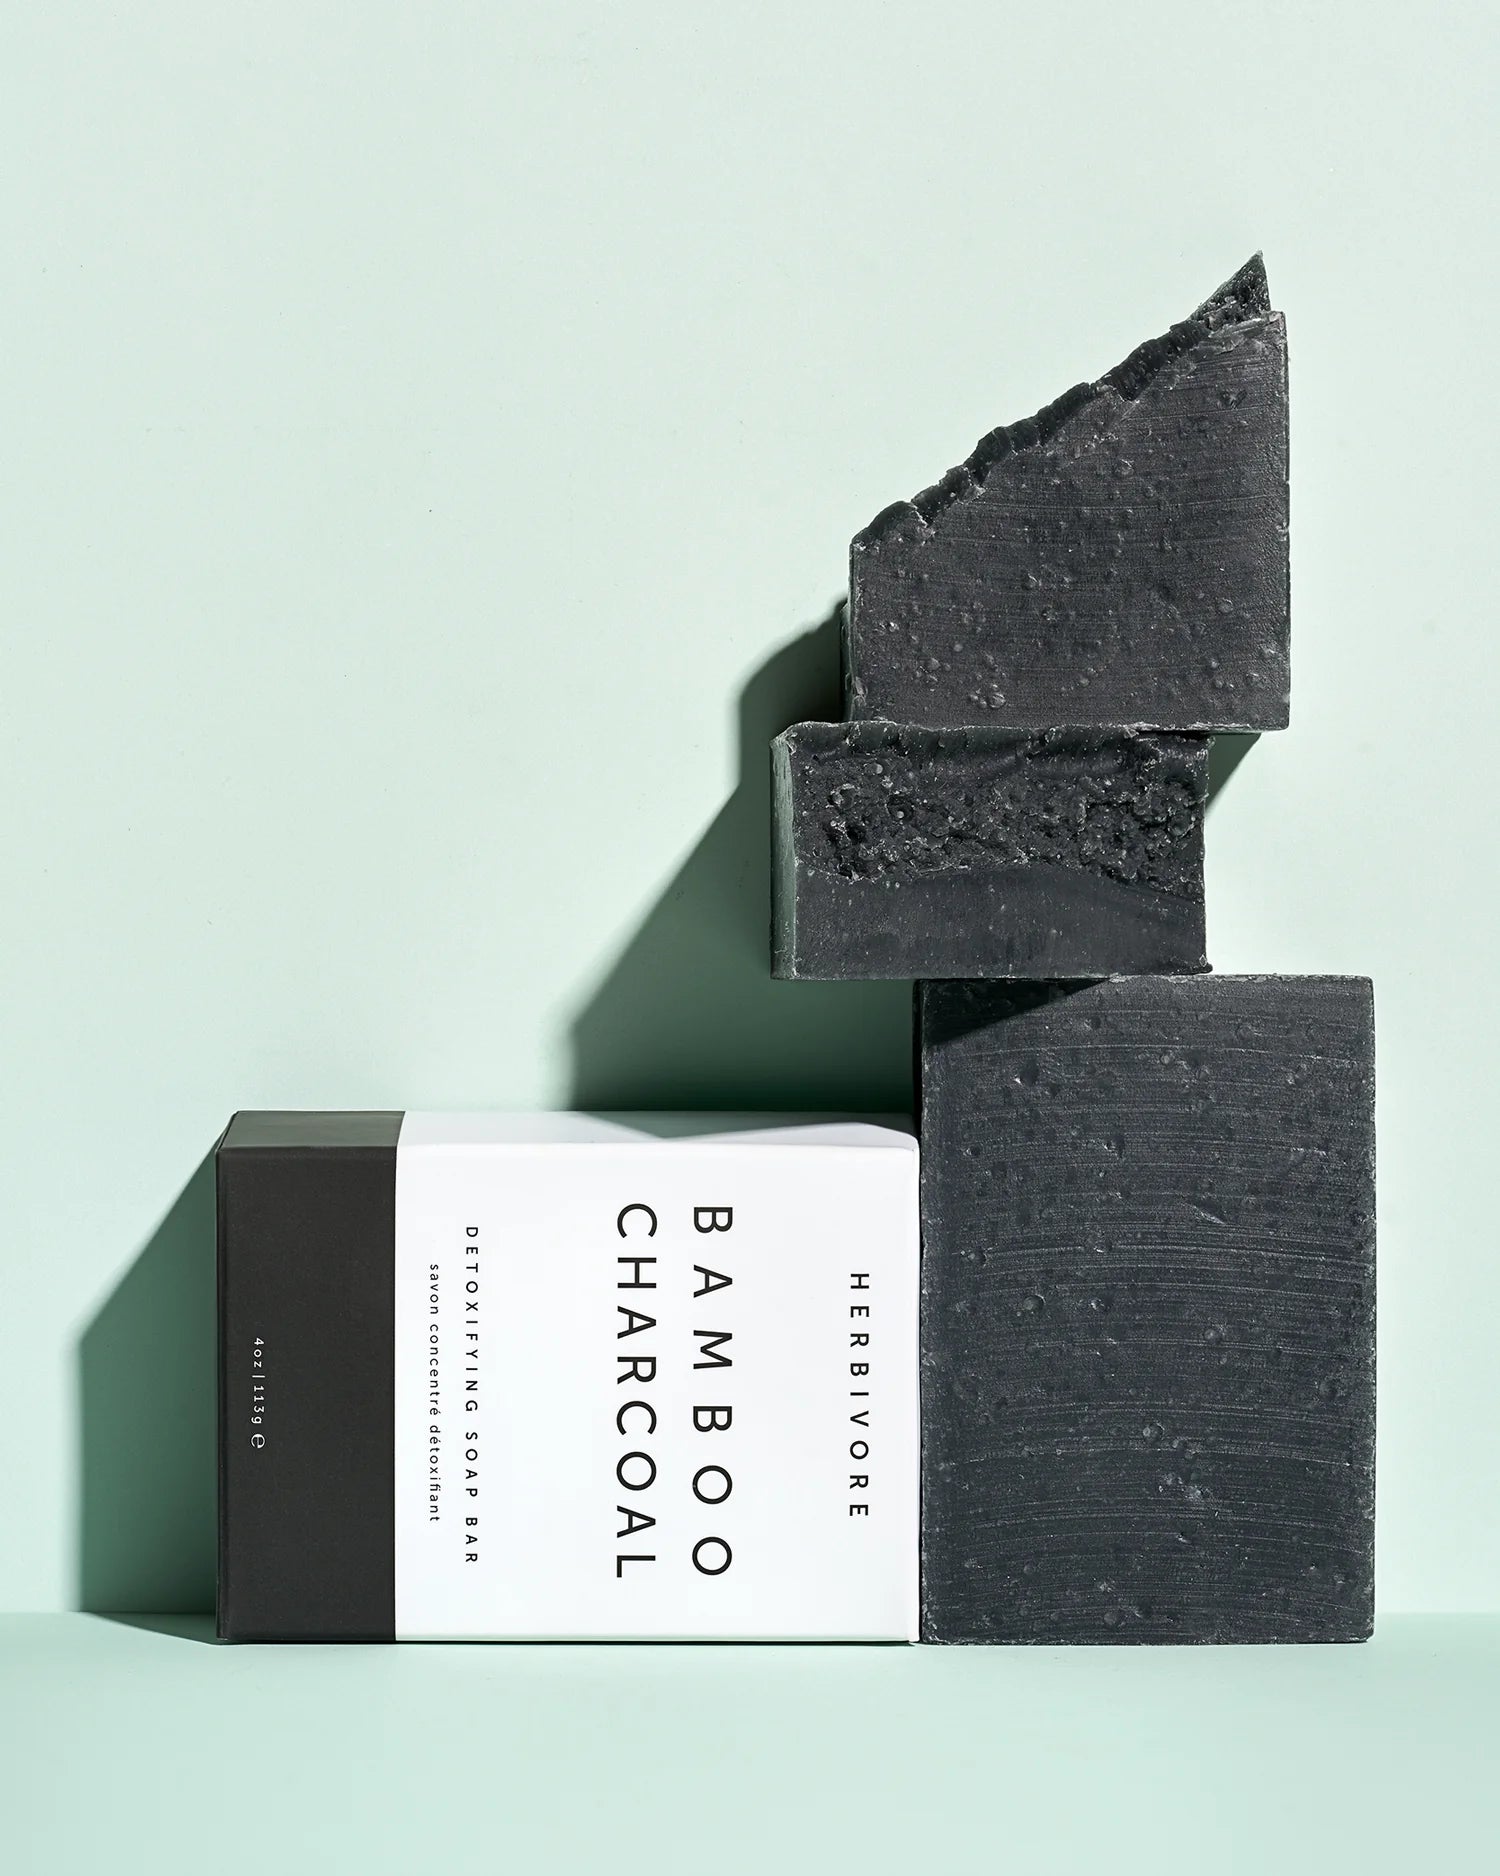 Herbivore Bamboo Charcoal Cleansing Bar Soap